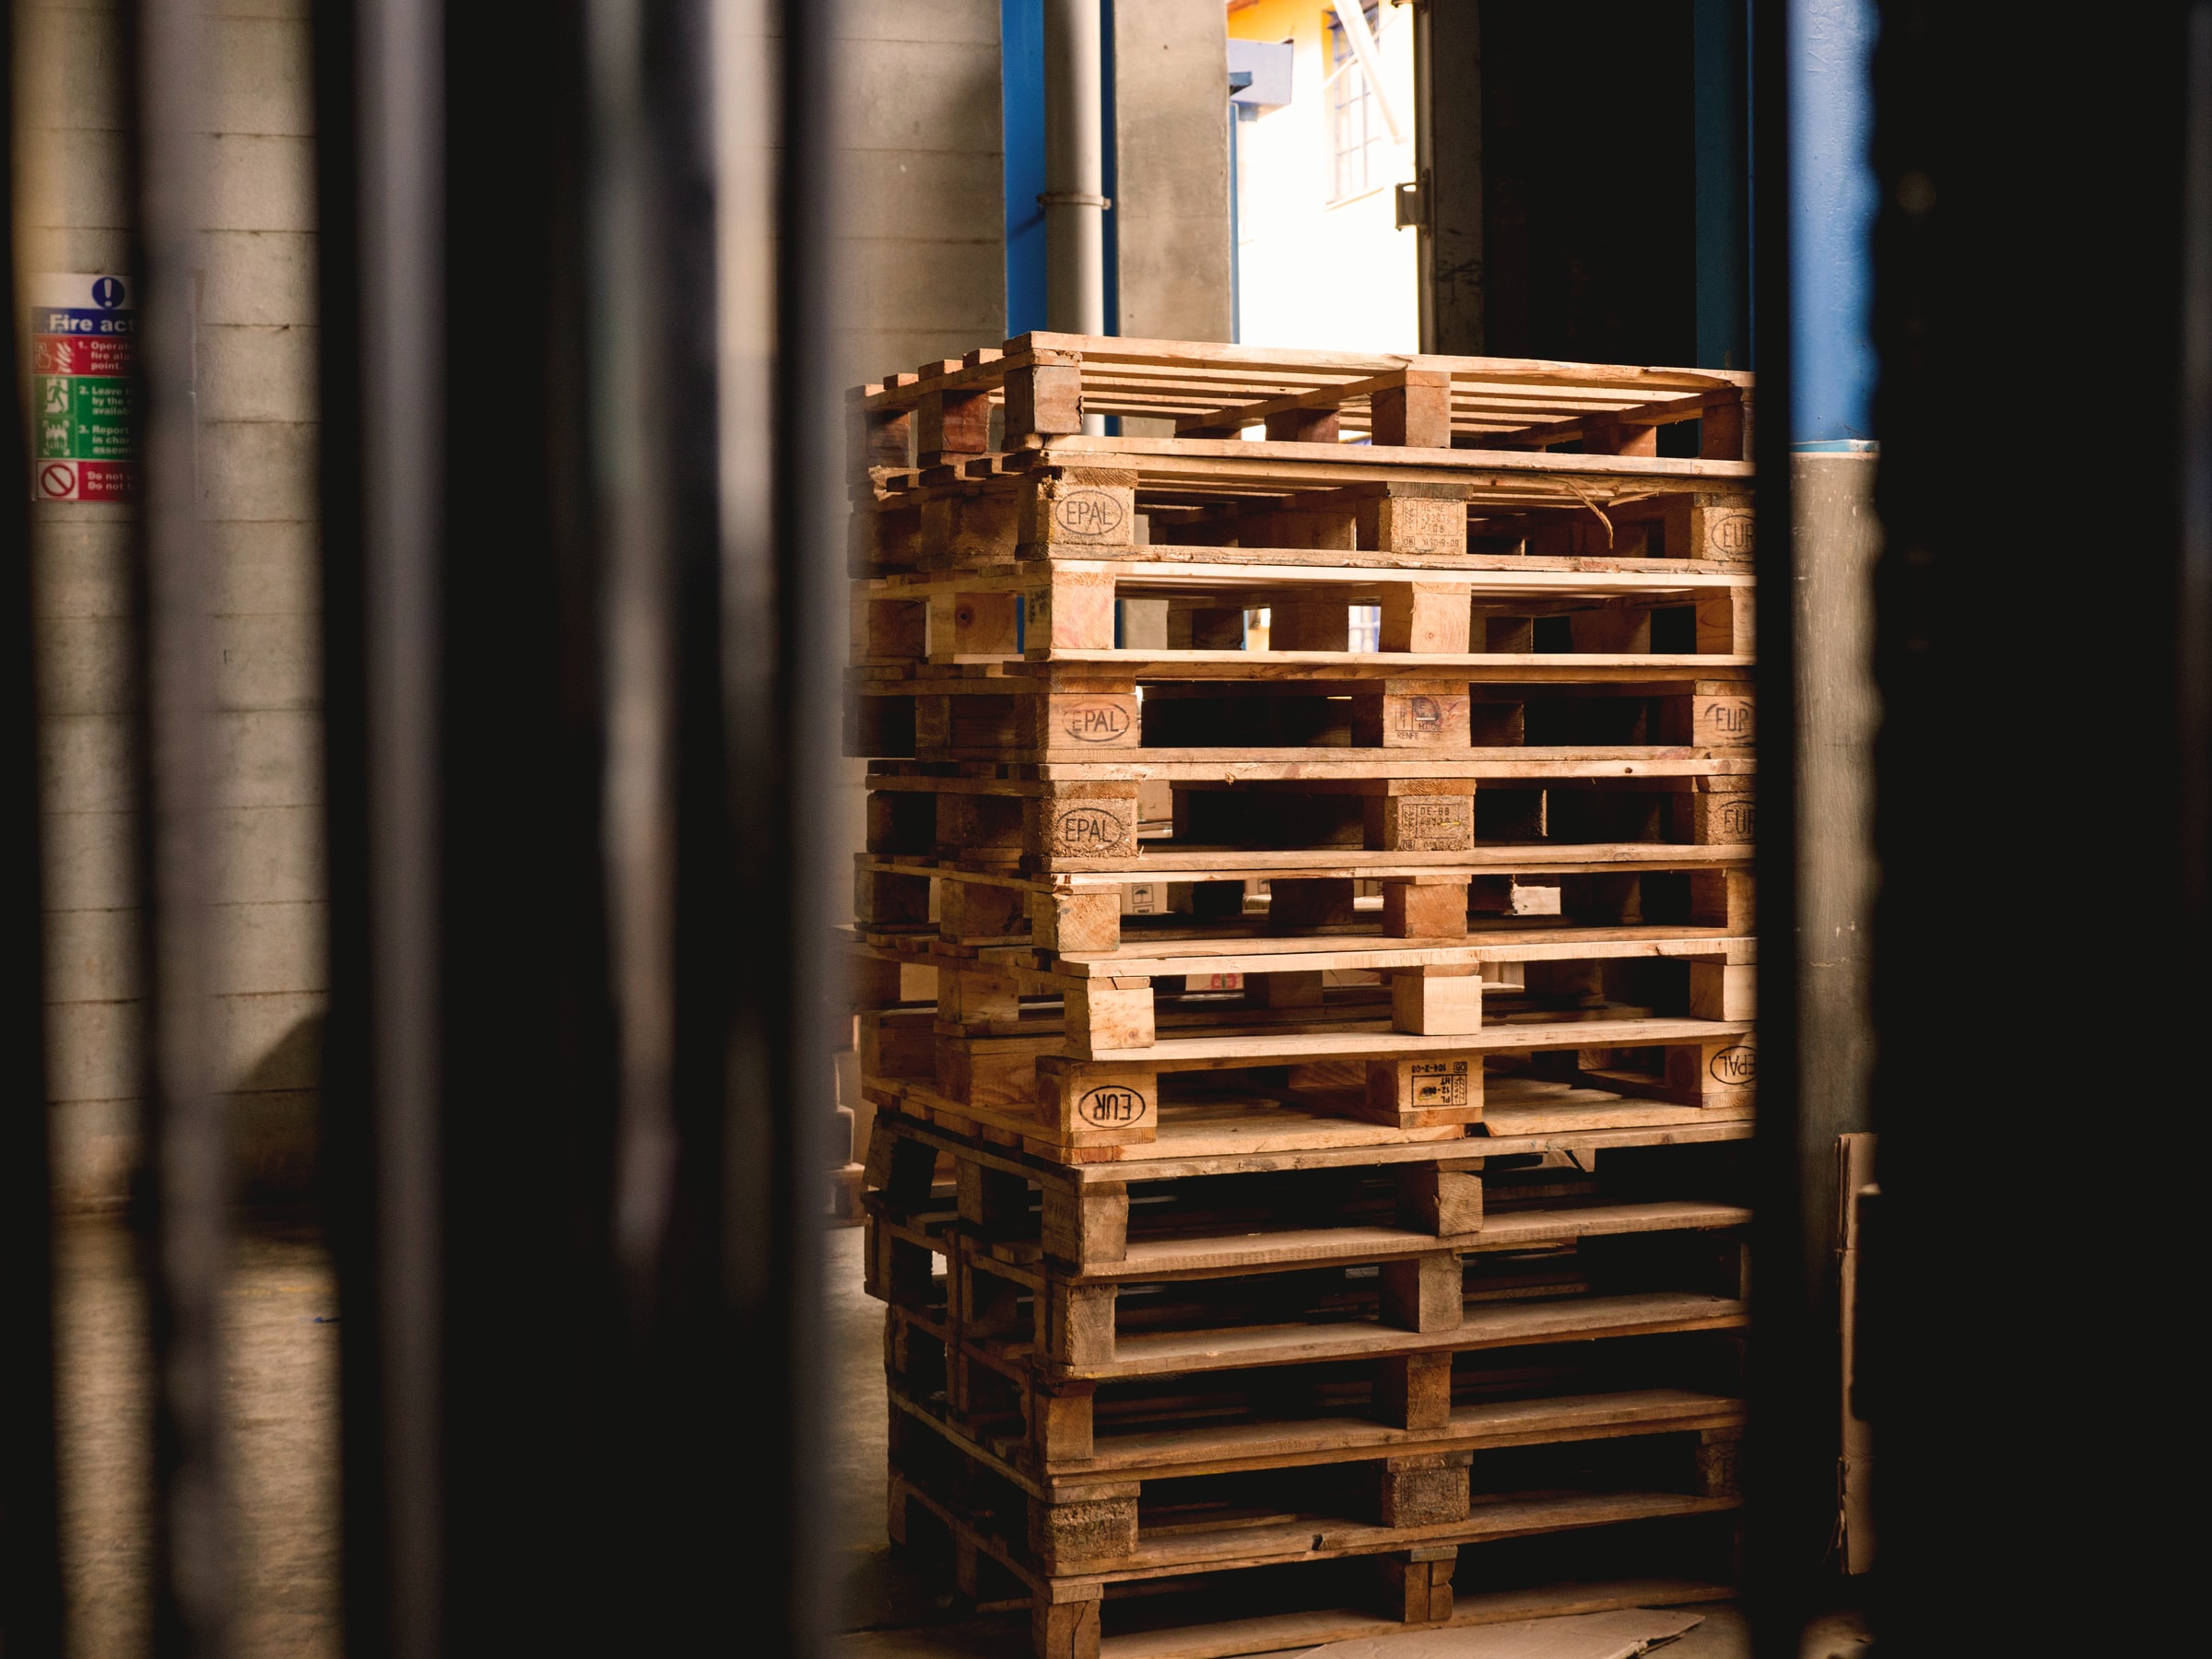 How It's Made - The Wood Pallet Manufacturing Process